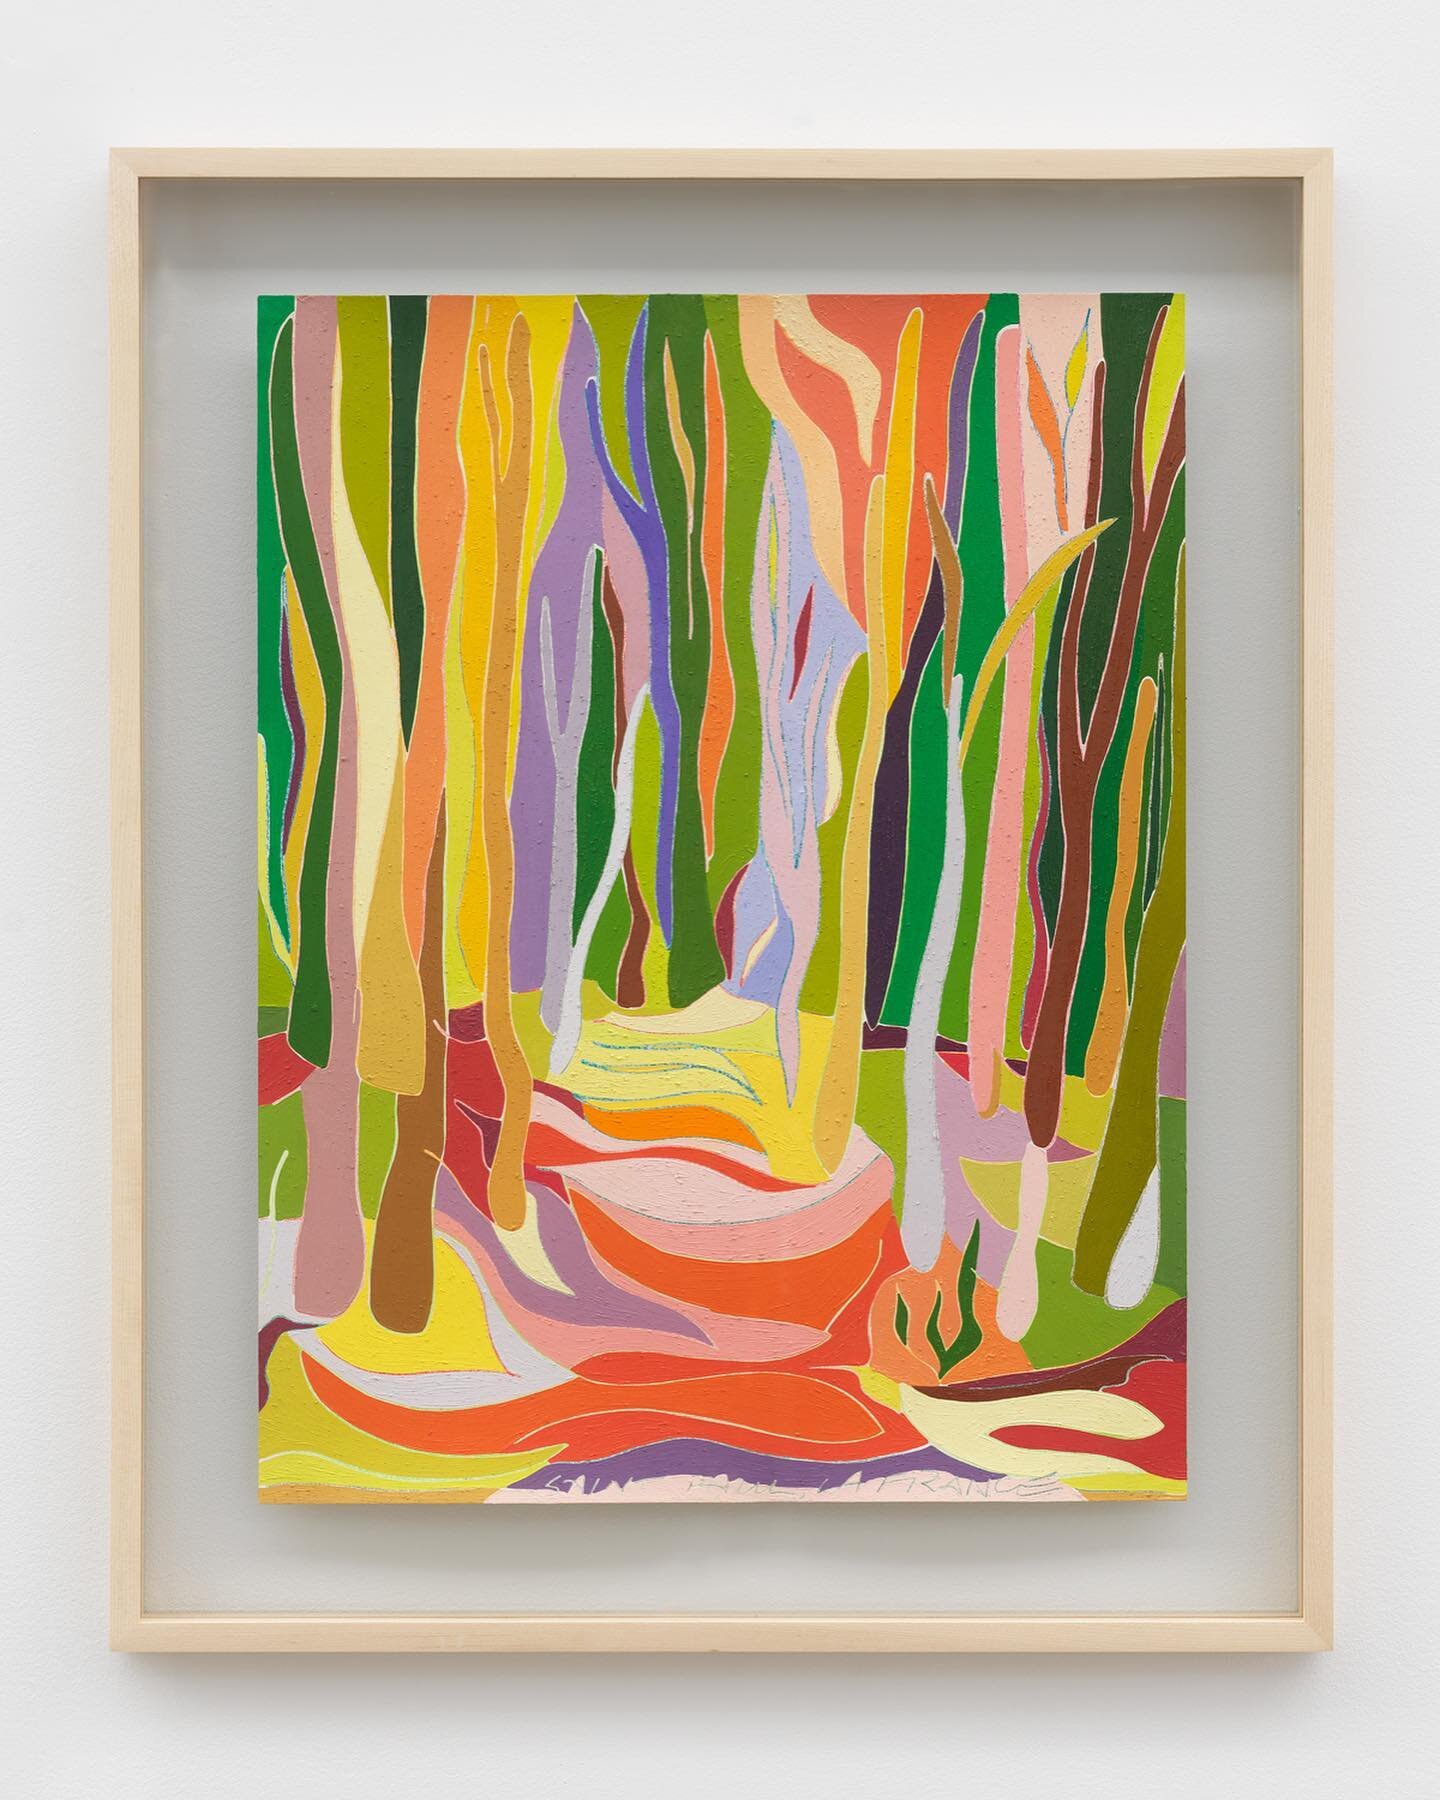 Tessa Perutz  Le R&ecirc;ve Am&eacute;ricain 

With Dream Fountain by Nick Atkins 

On view through Sunday, April 2, 2023.

Pictured:

For&ecirc;t Tropicale, Sc&egrave;ne Multicolore, Sud de la France (Vence) #1
Oil and pencil on paper

For&ecirc;t T